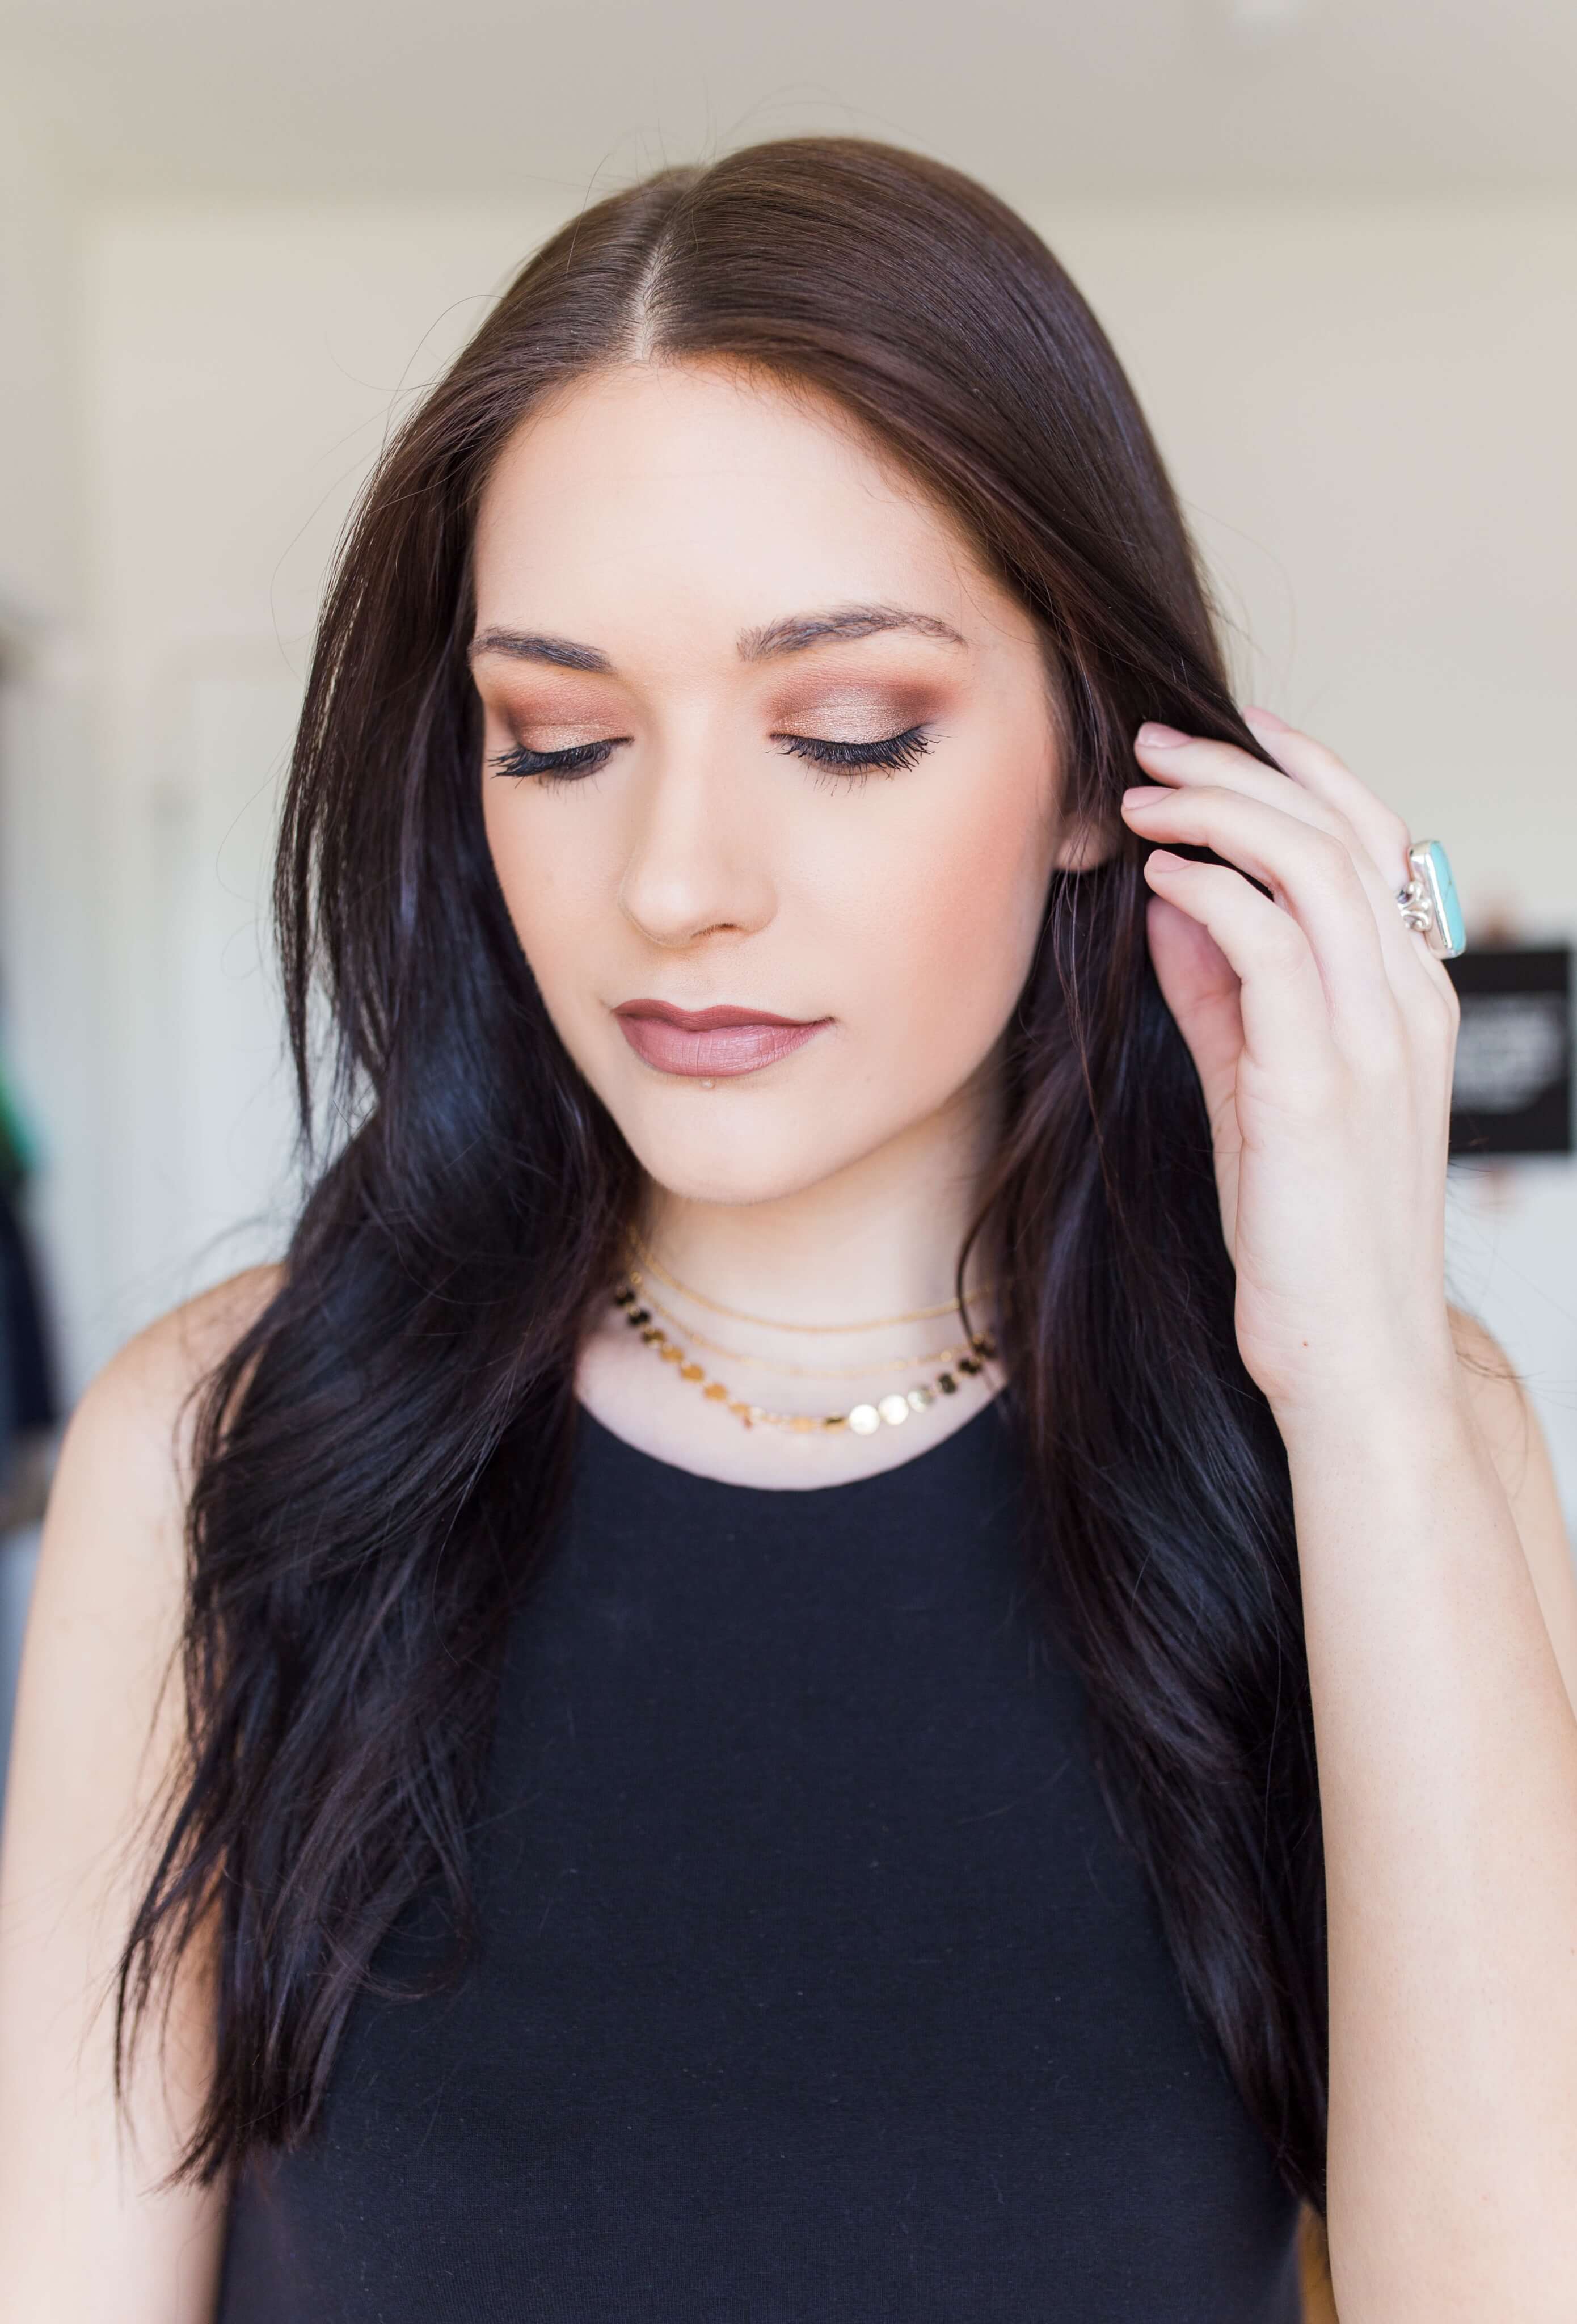 One Palette, Two Ways: Too Faced Sweet Peach Palette | Twinspiration